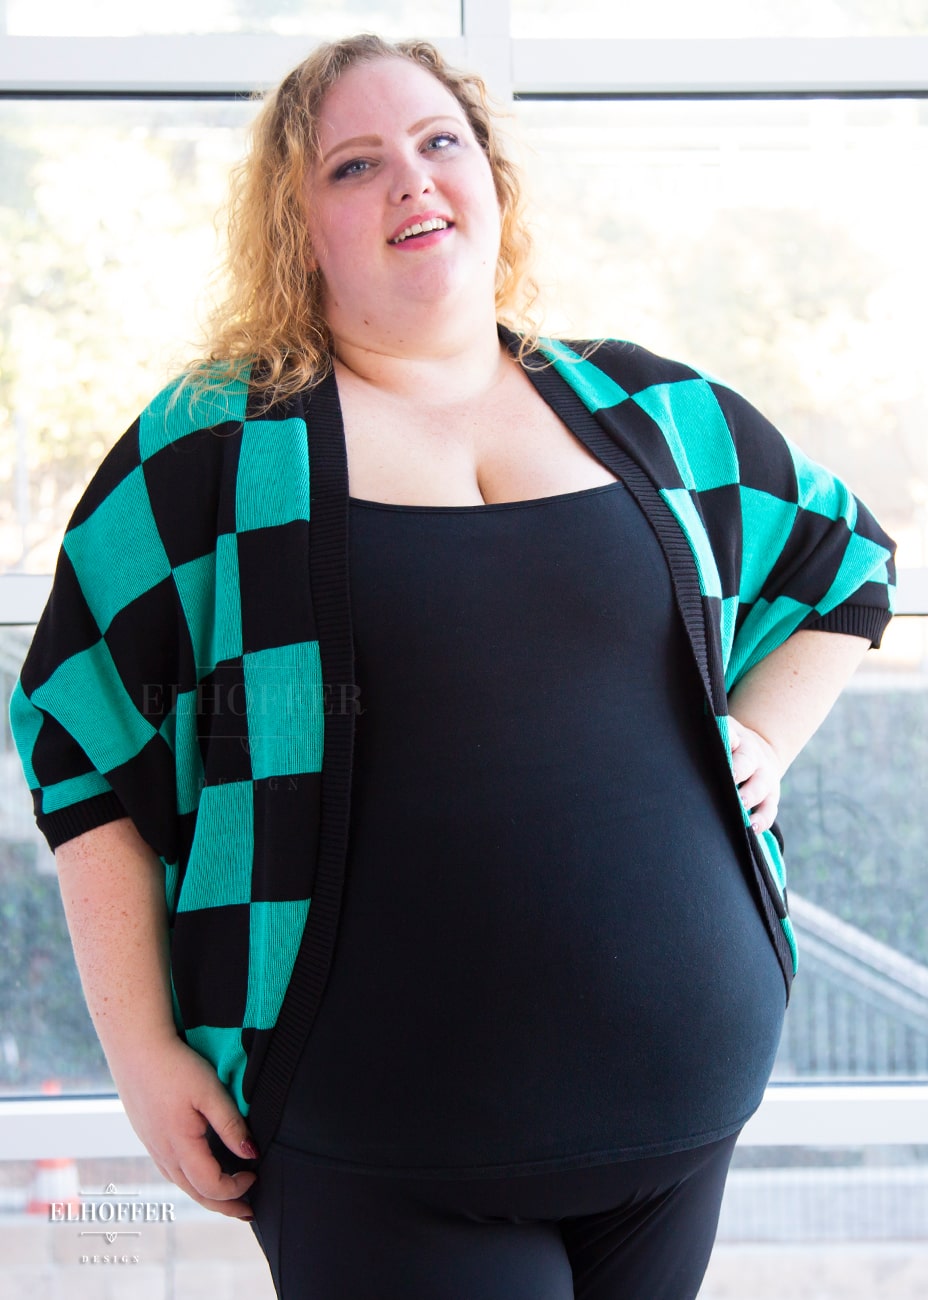 Bee, a fair skinned 3xl model with shoulder length curly blonde hair, is wearing a XL-3XL sample of a shrug with a black and green chessboard pattern. The shrug featured 3/4 sleeves and black ribbing along edges and cuffs.